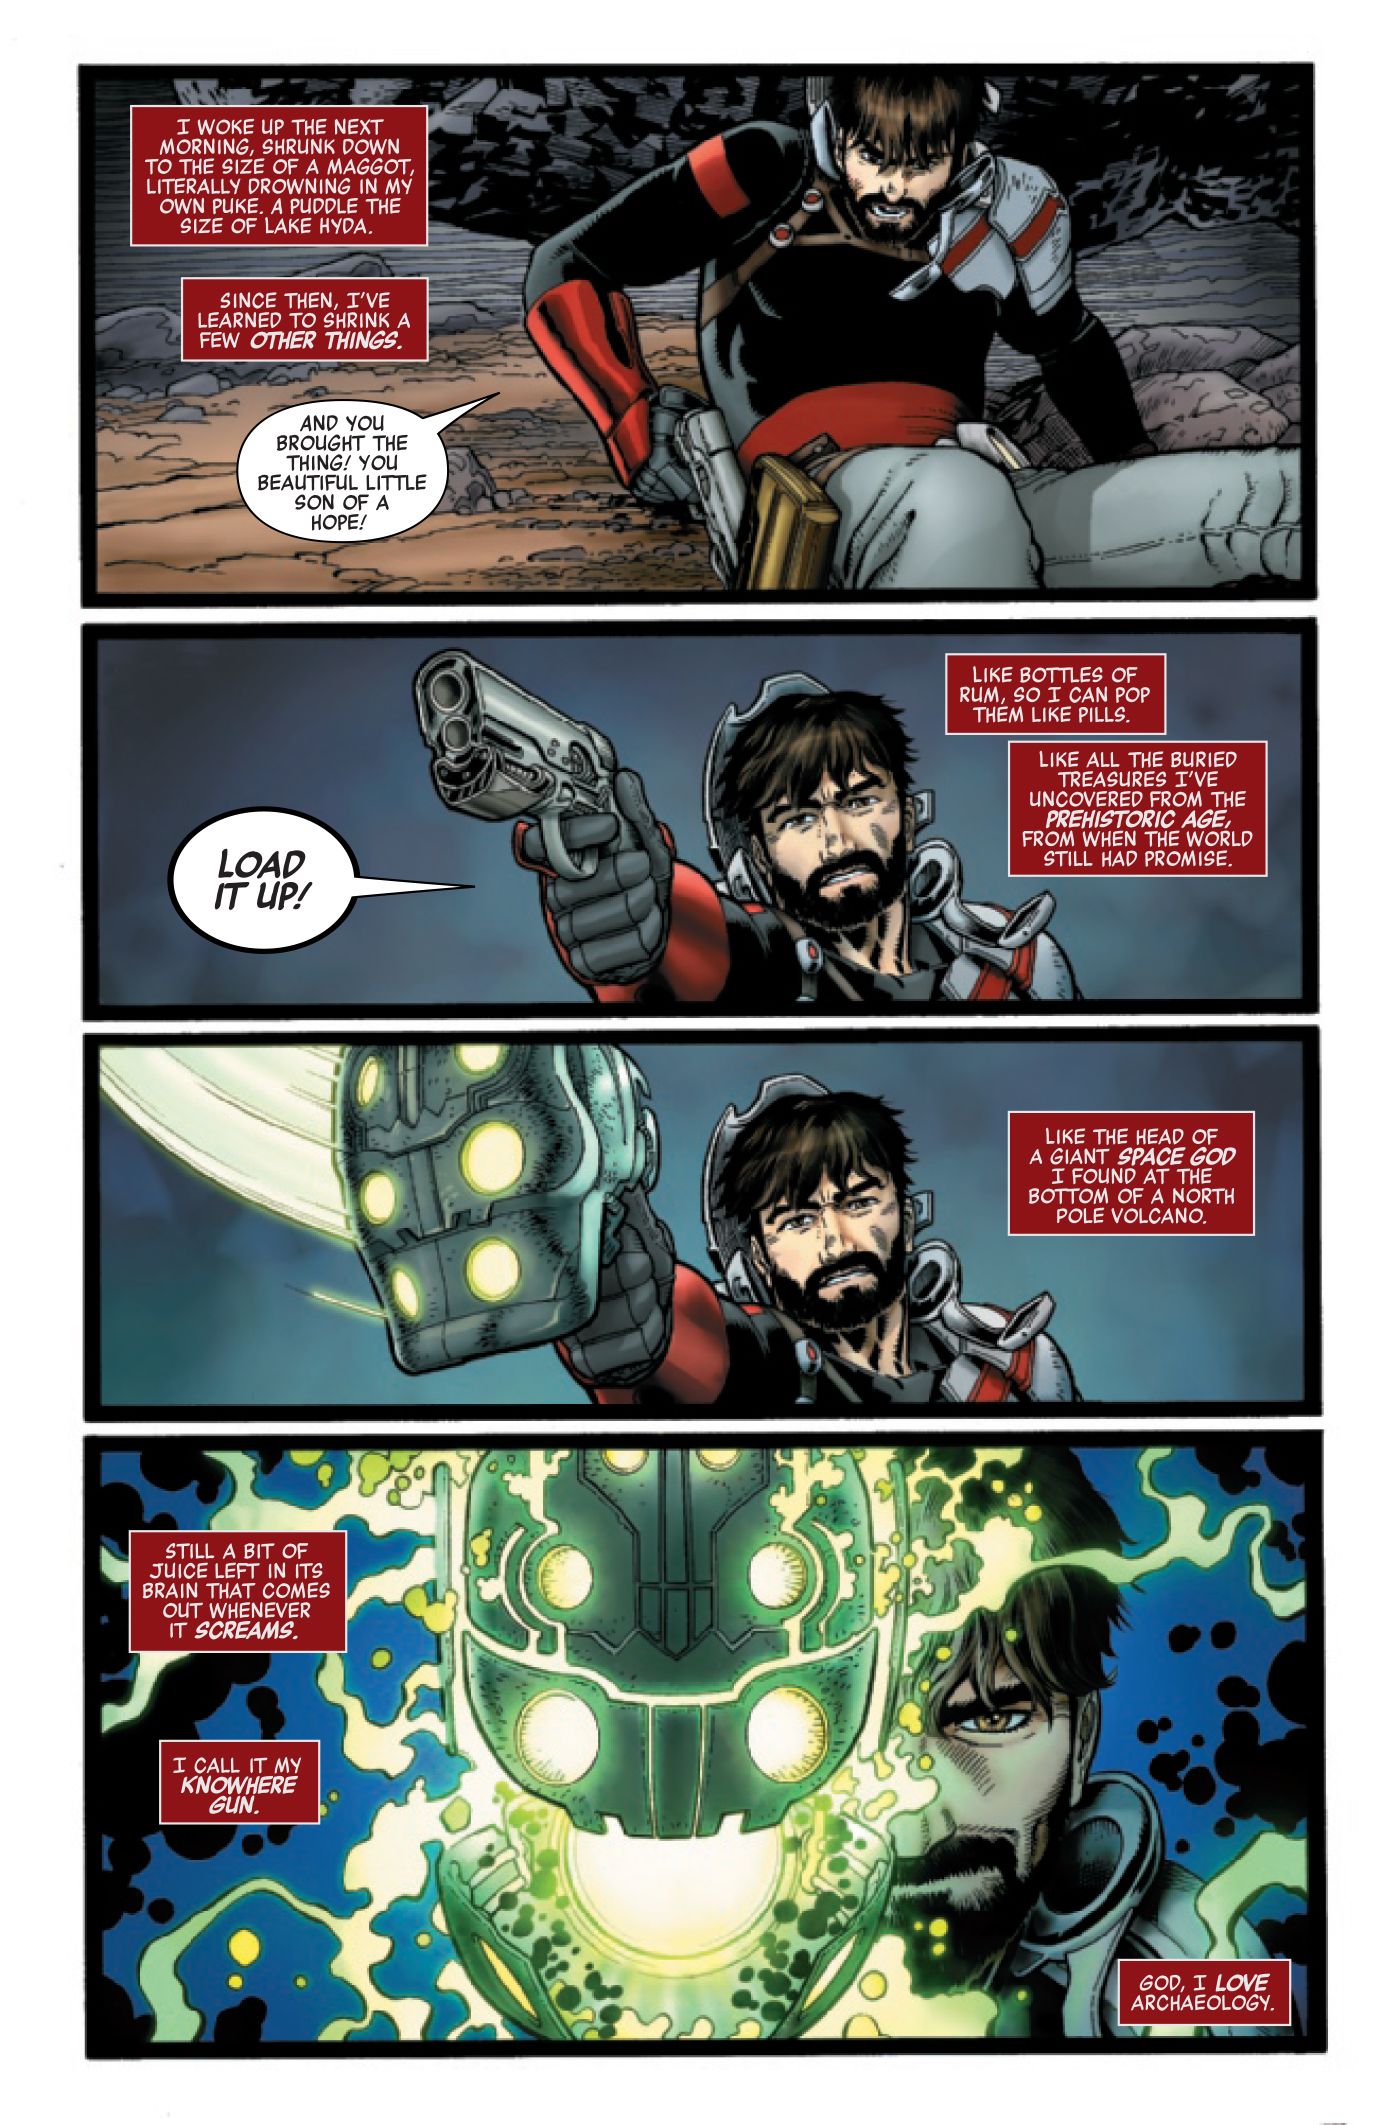 Tony Stark readies a Knowhere Gun, made from the severed head of a celestial.